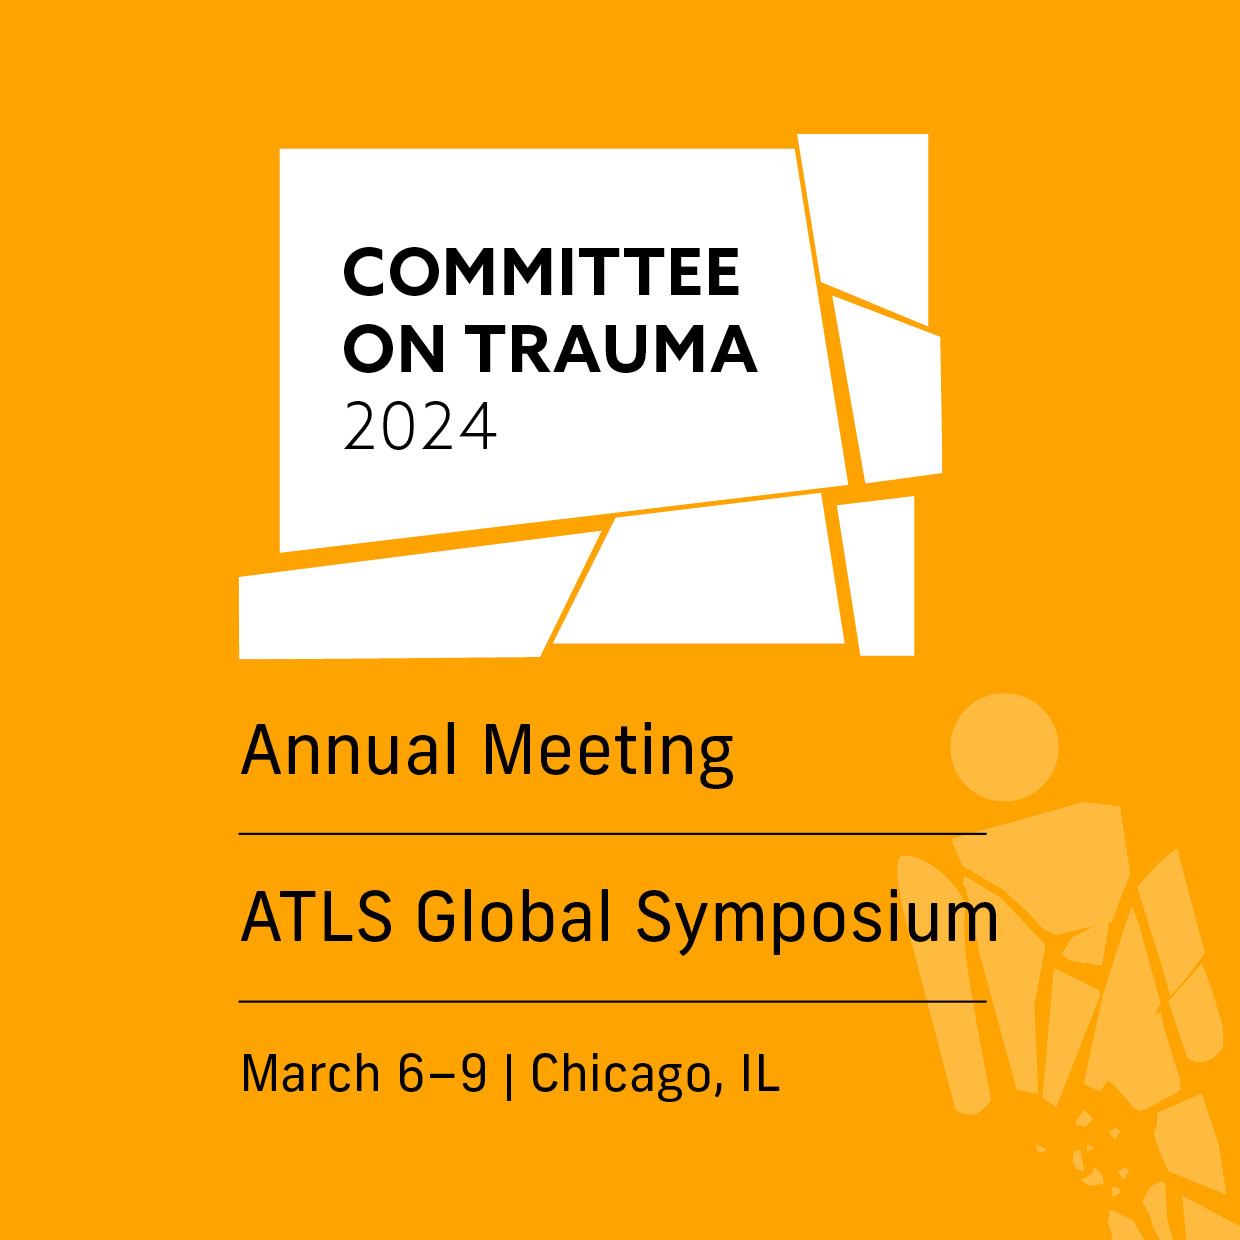 2024 Committee on Trauma Annual Meeting and ATLS Global Symposium